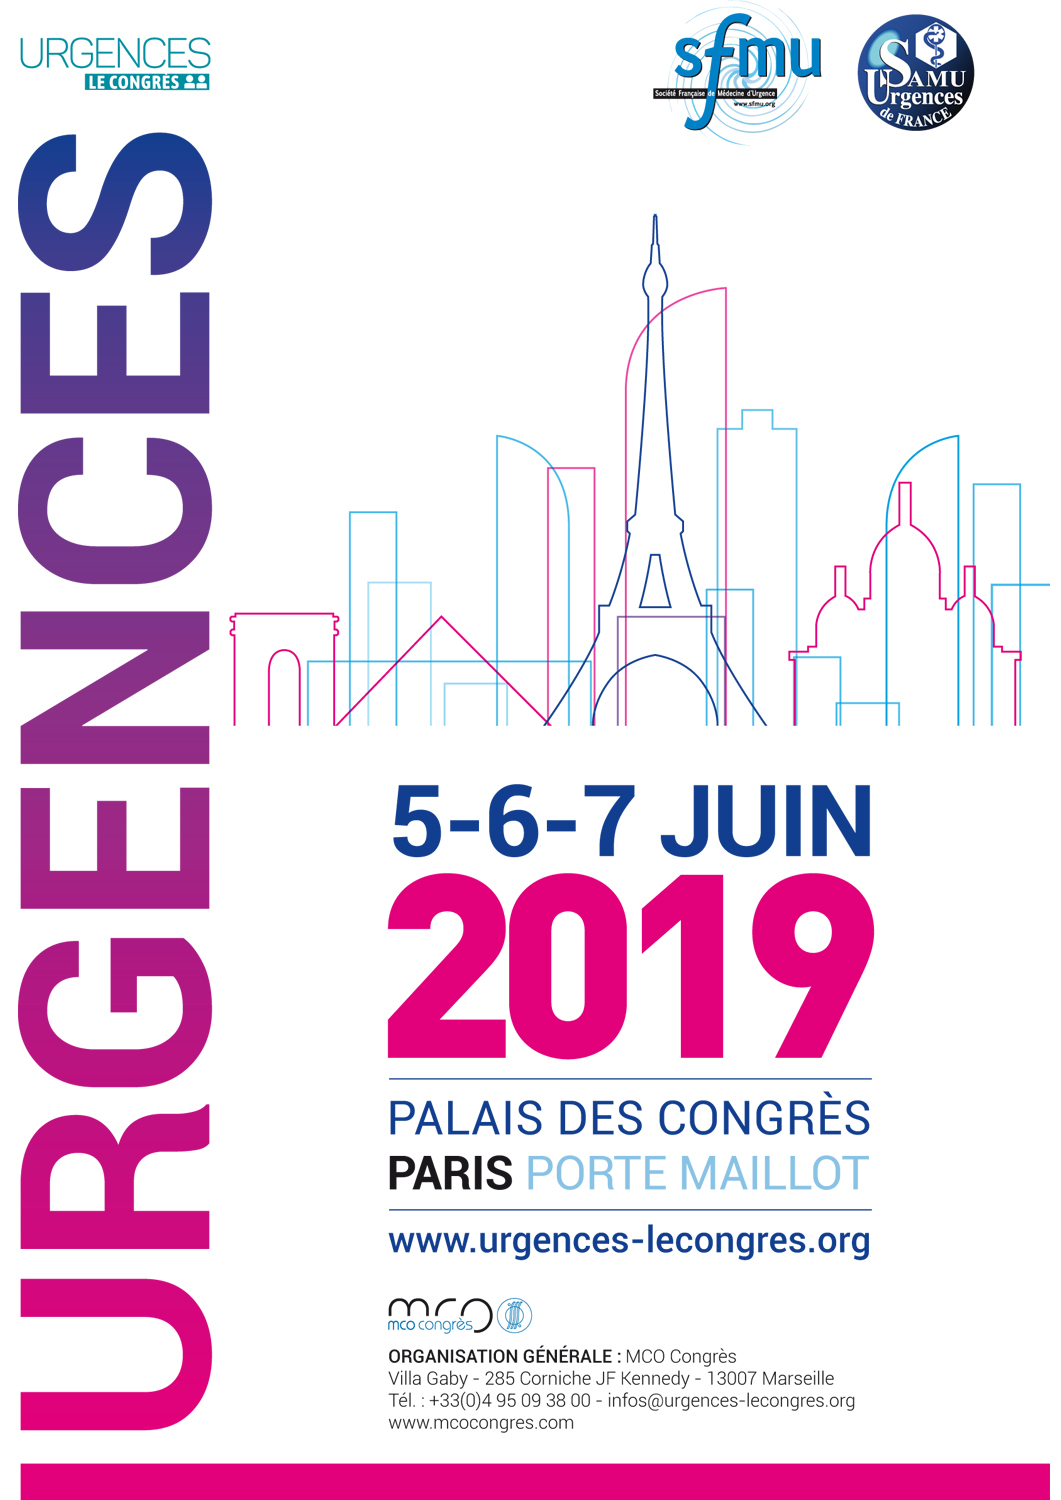 13th Congress of the French Society of Emergency Medicine (SFMU) 2019